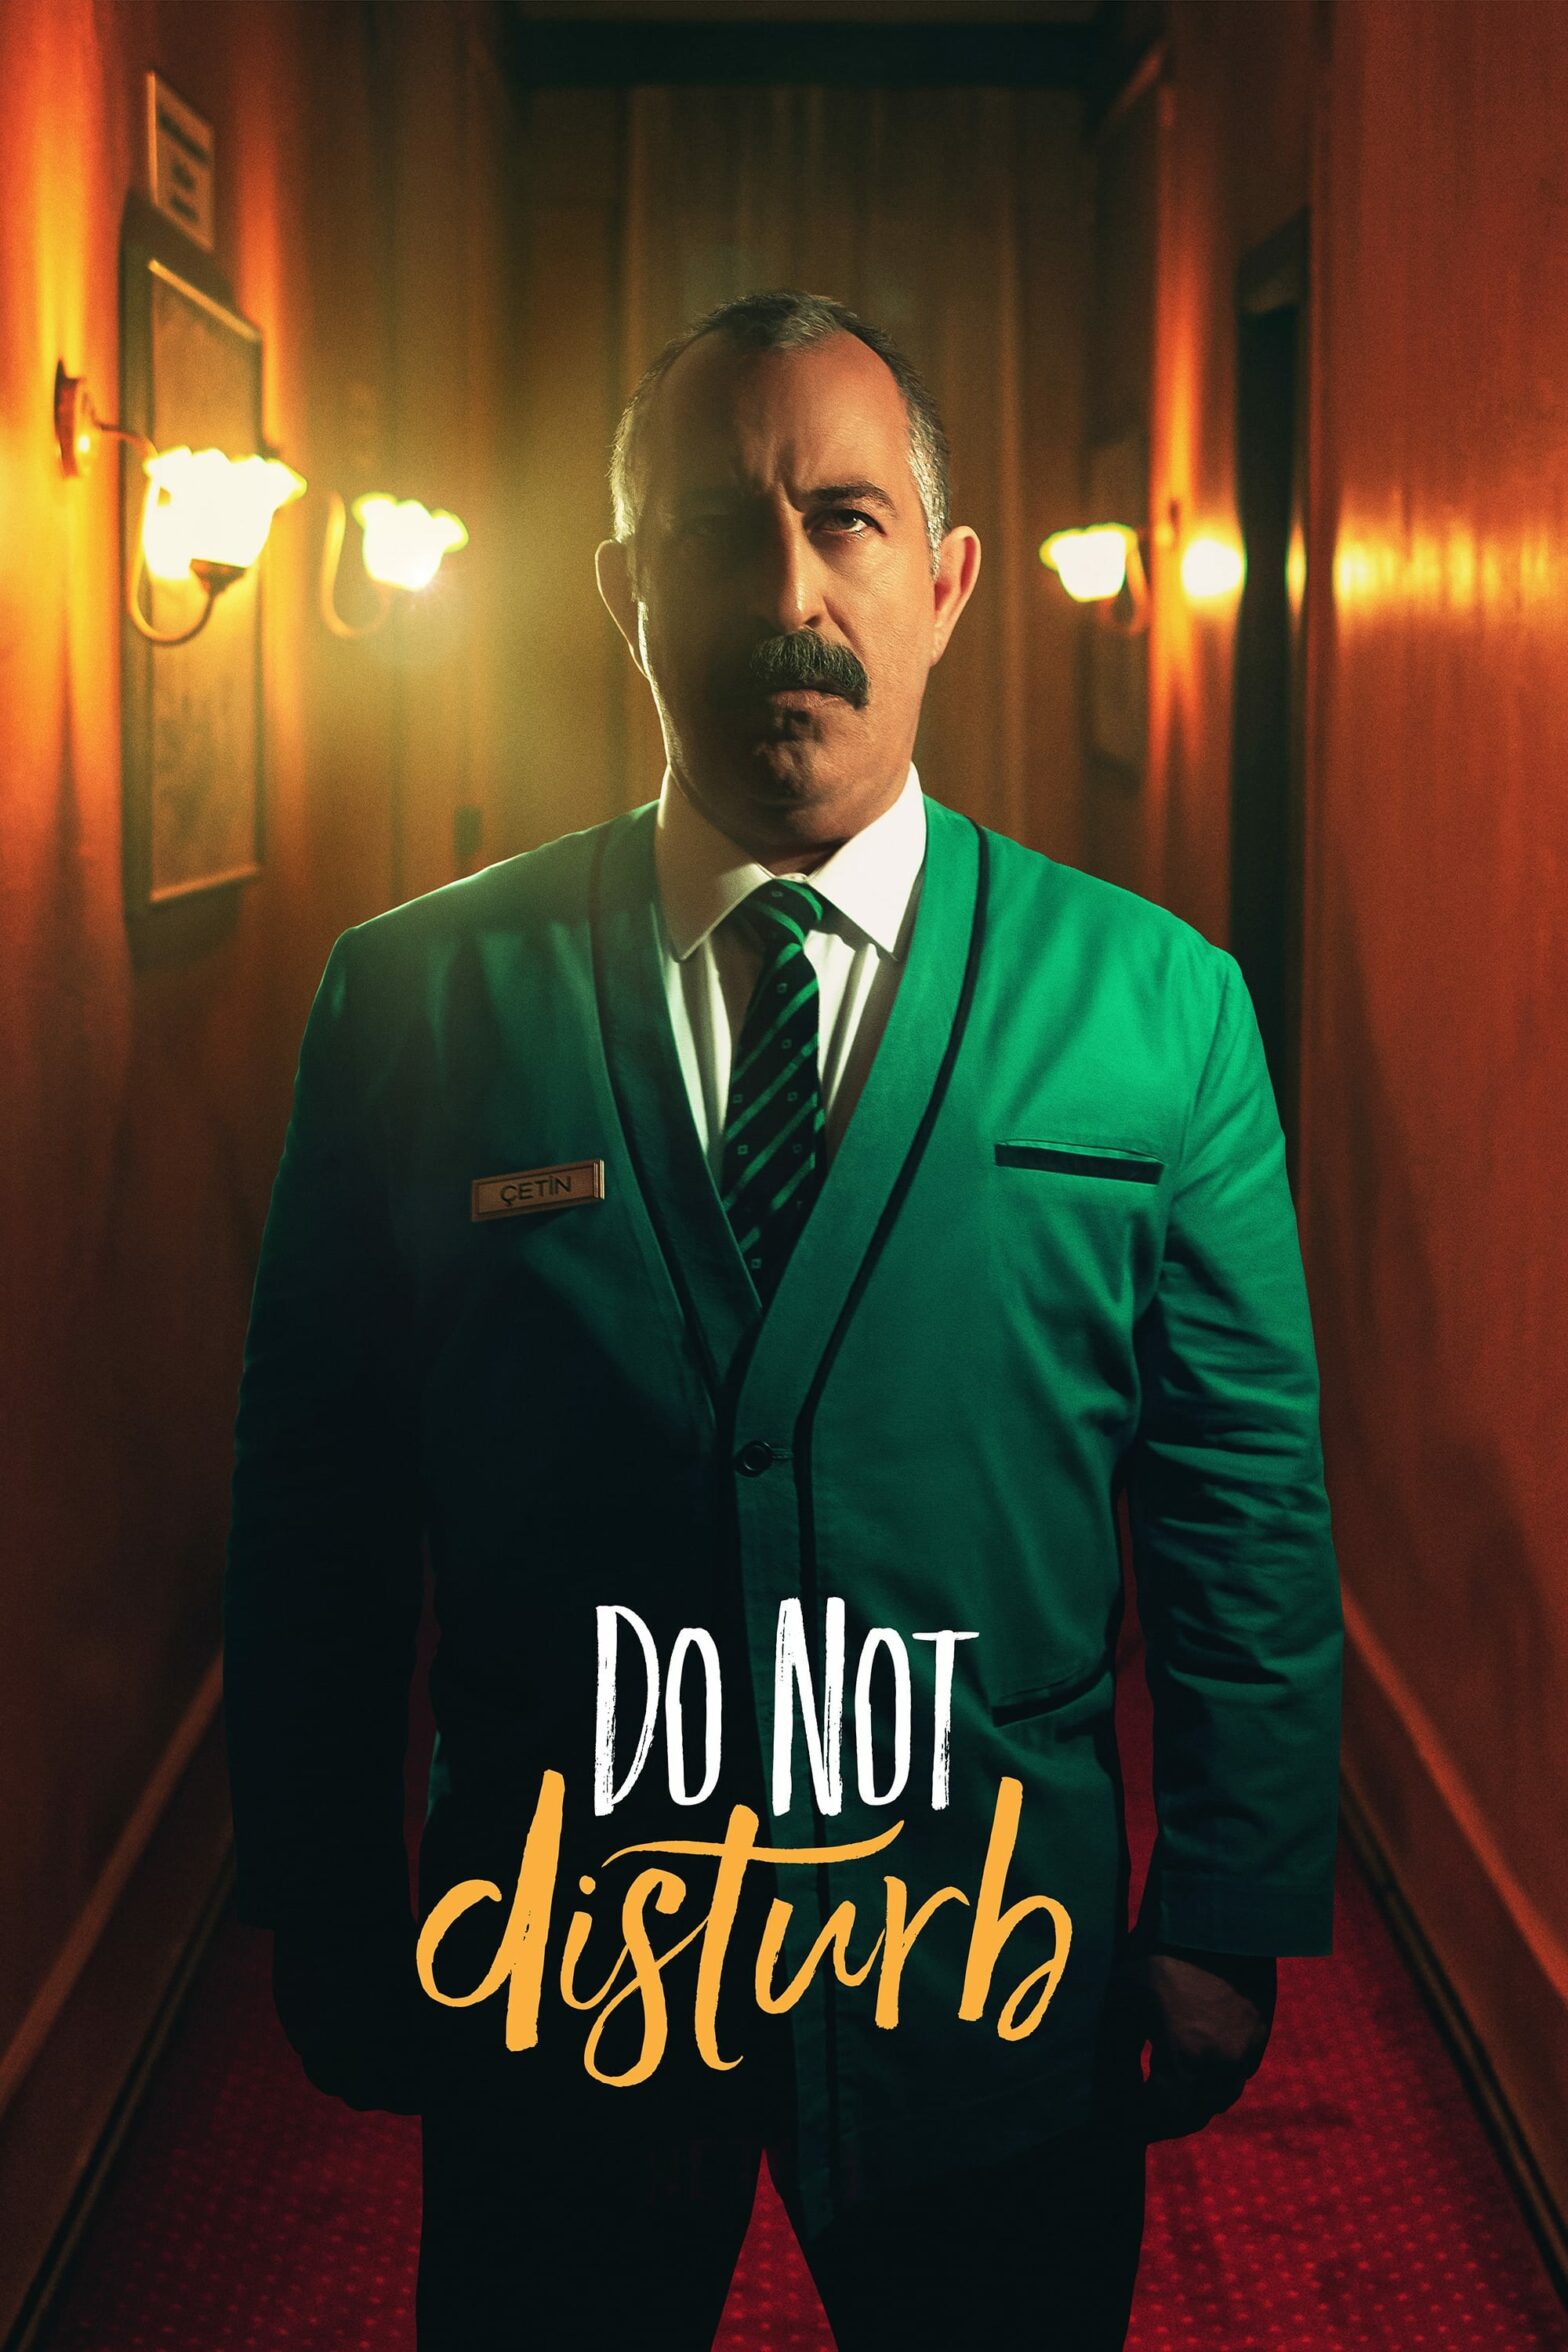 Poster for the movie "Do Not Disturb"